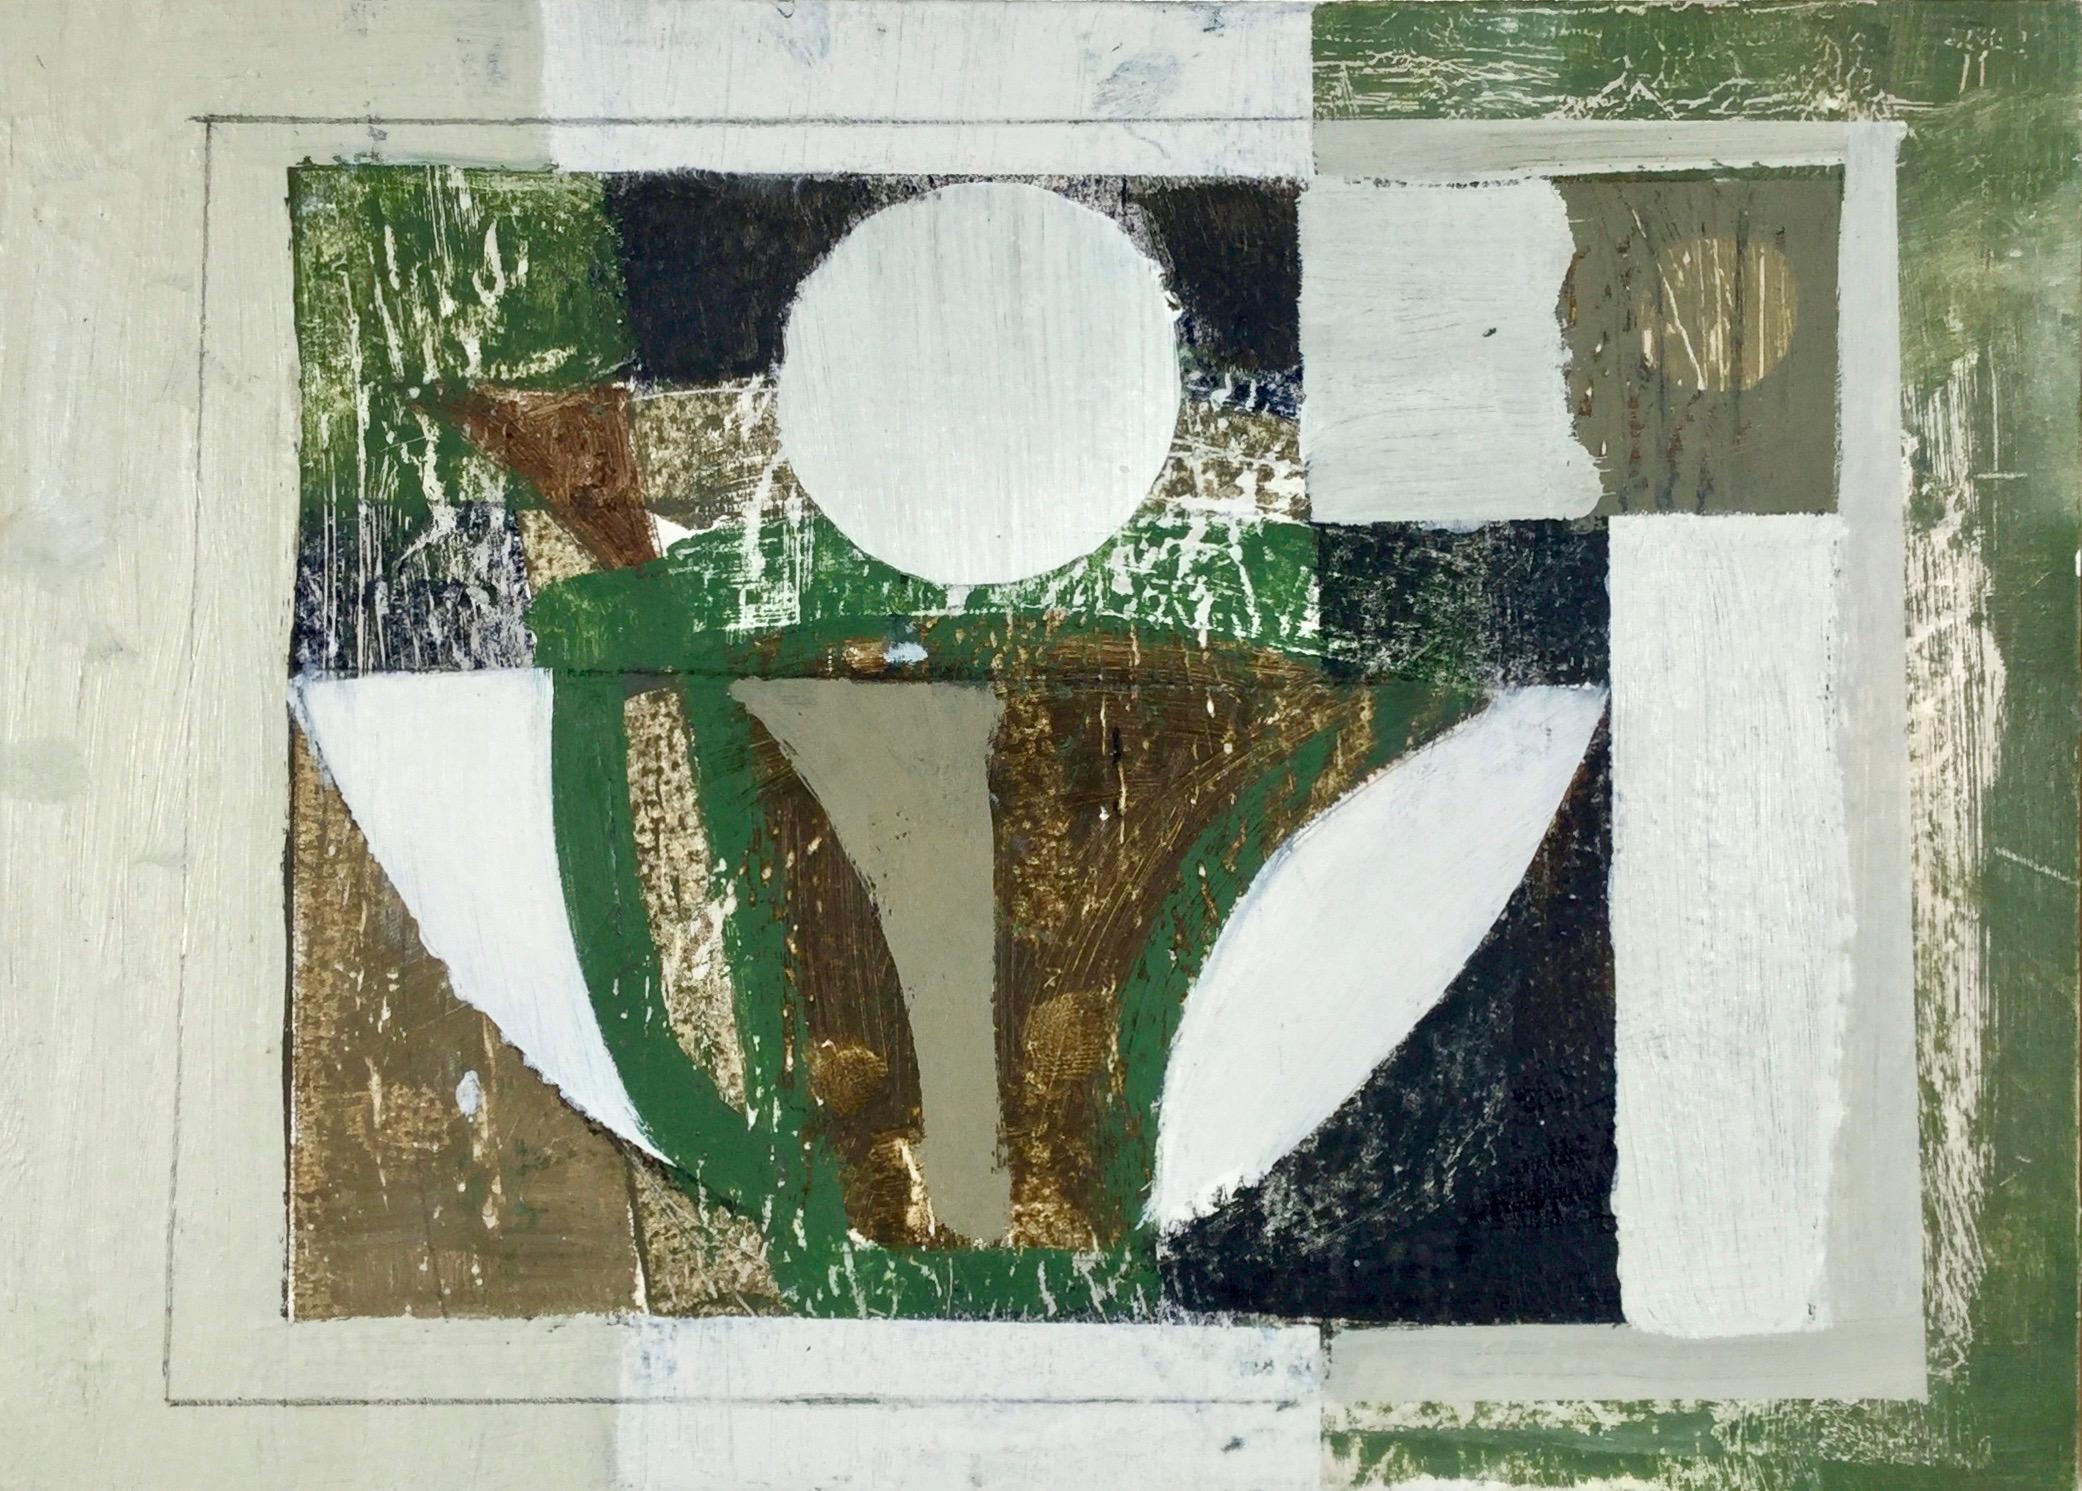 Daisy Cook, Bowl and Jug. Still life, green, geometric, abstract oil painting